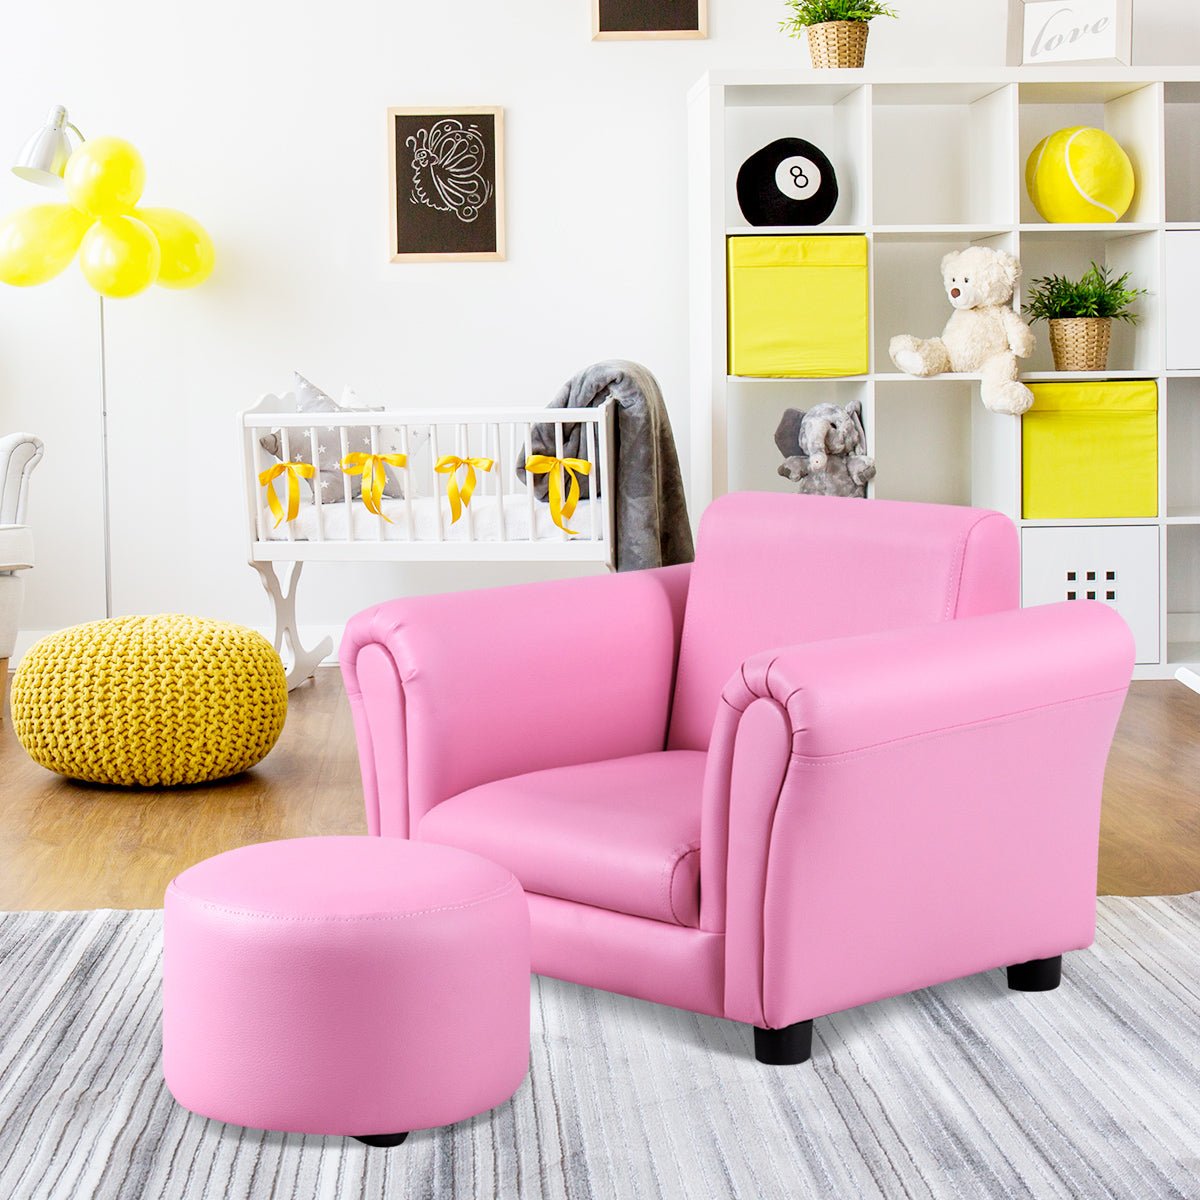 Pink Ergonomic Sofa and Footstool - Comfortable Seating for Babies and Children